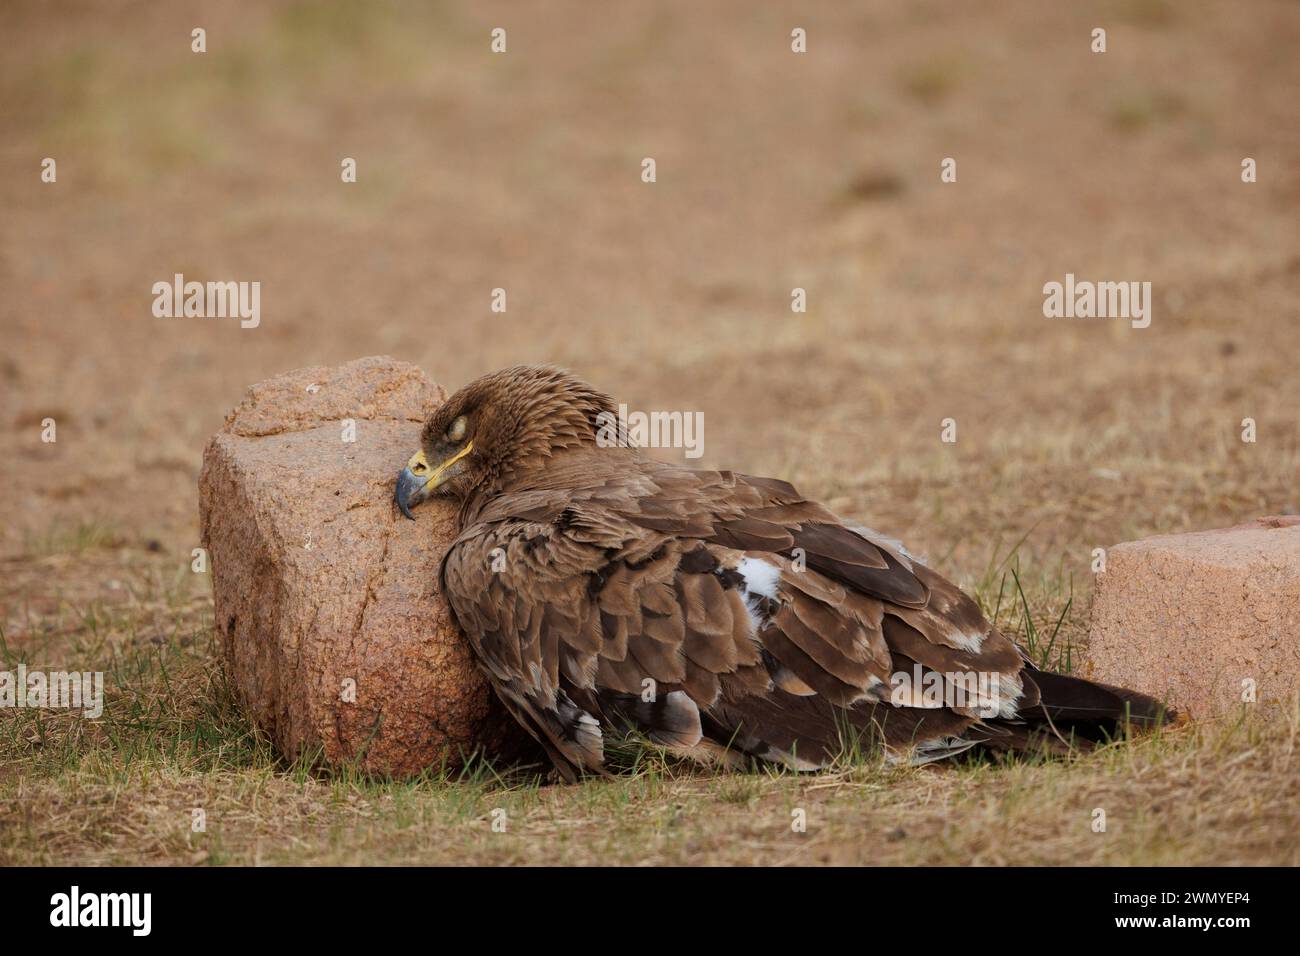 Mongolia, Eastern Mongolia, Steppe, Steppe Eagle (Aquila nipalensis), on the ground, sleeps against a stone sheltered from the wind Stock Photo